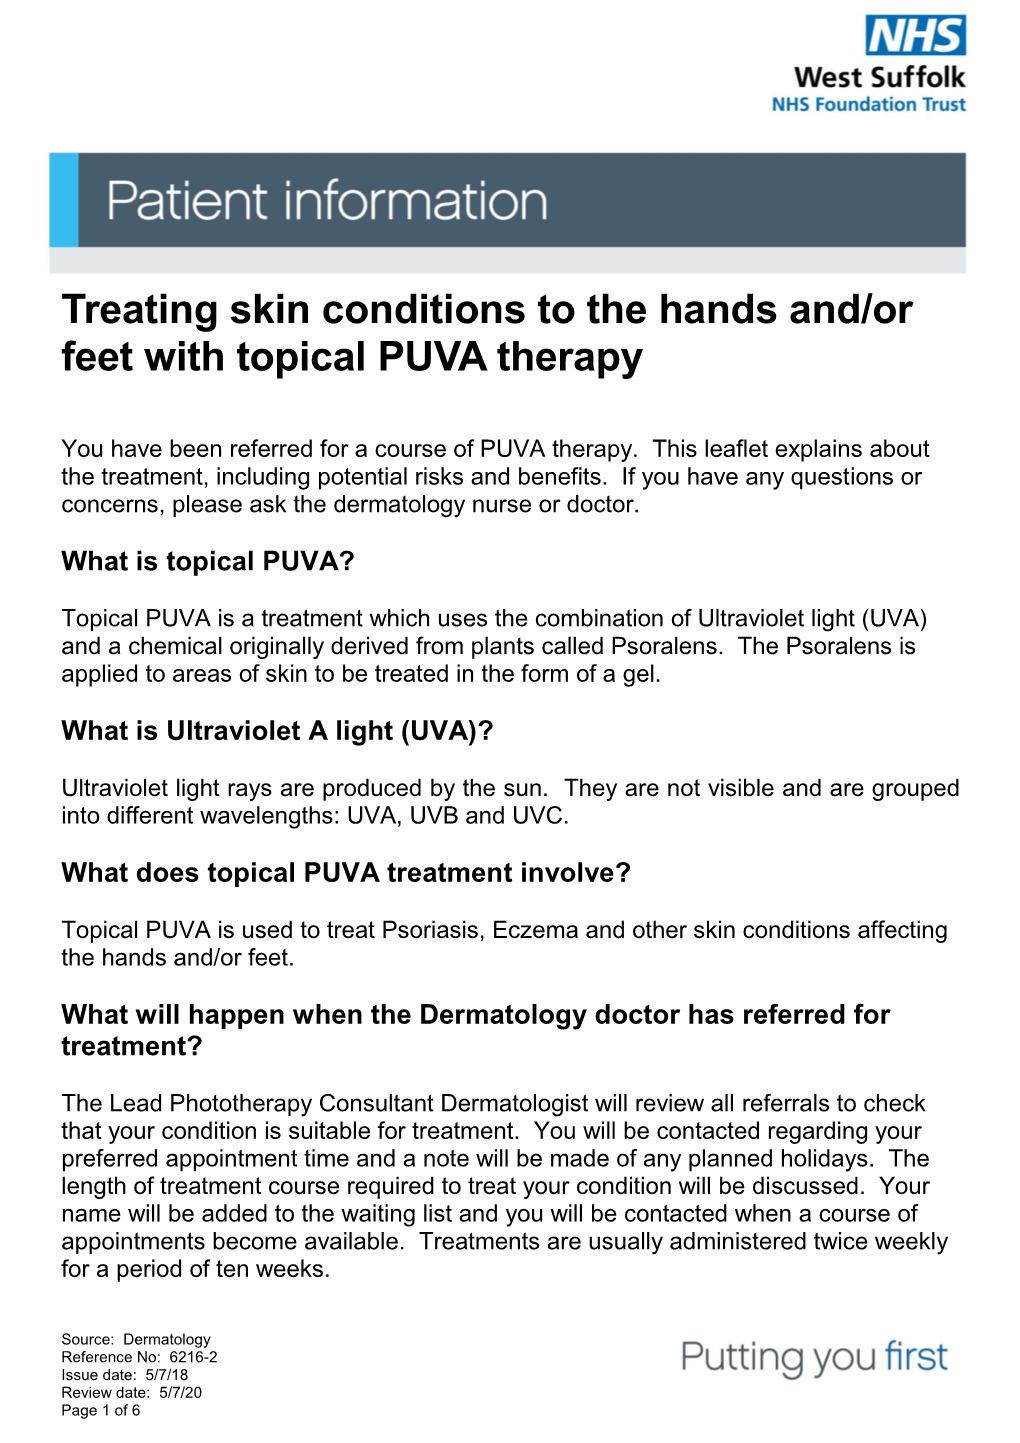 Treating Skin Conditions to the Hands and Or Feet with Topical PUVA Therapy